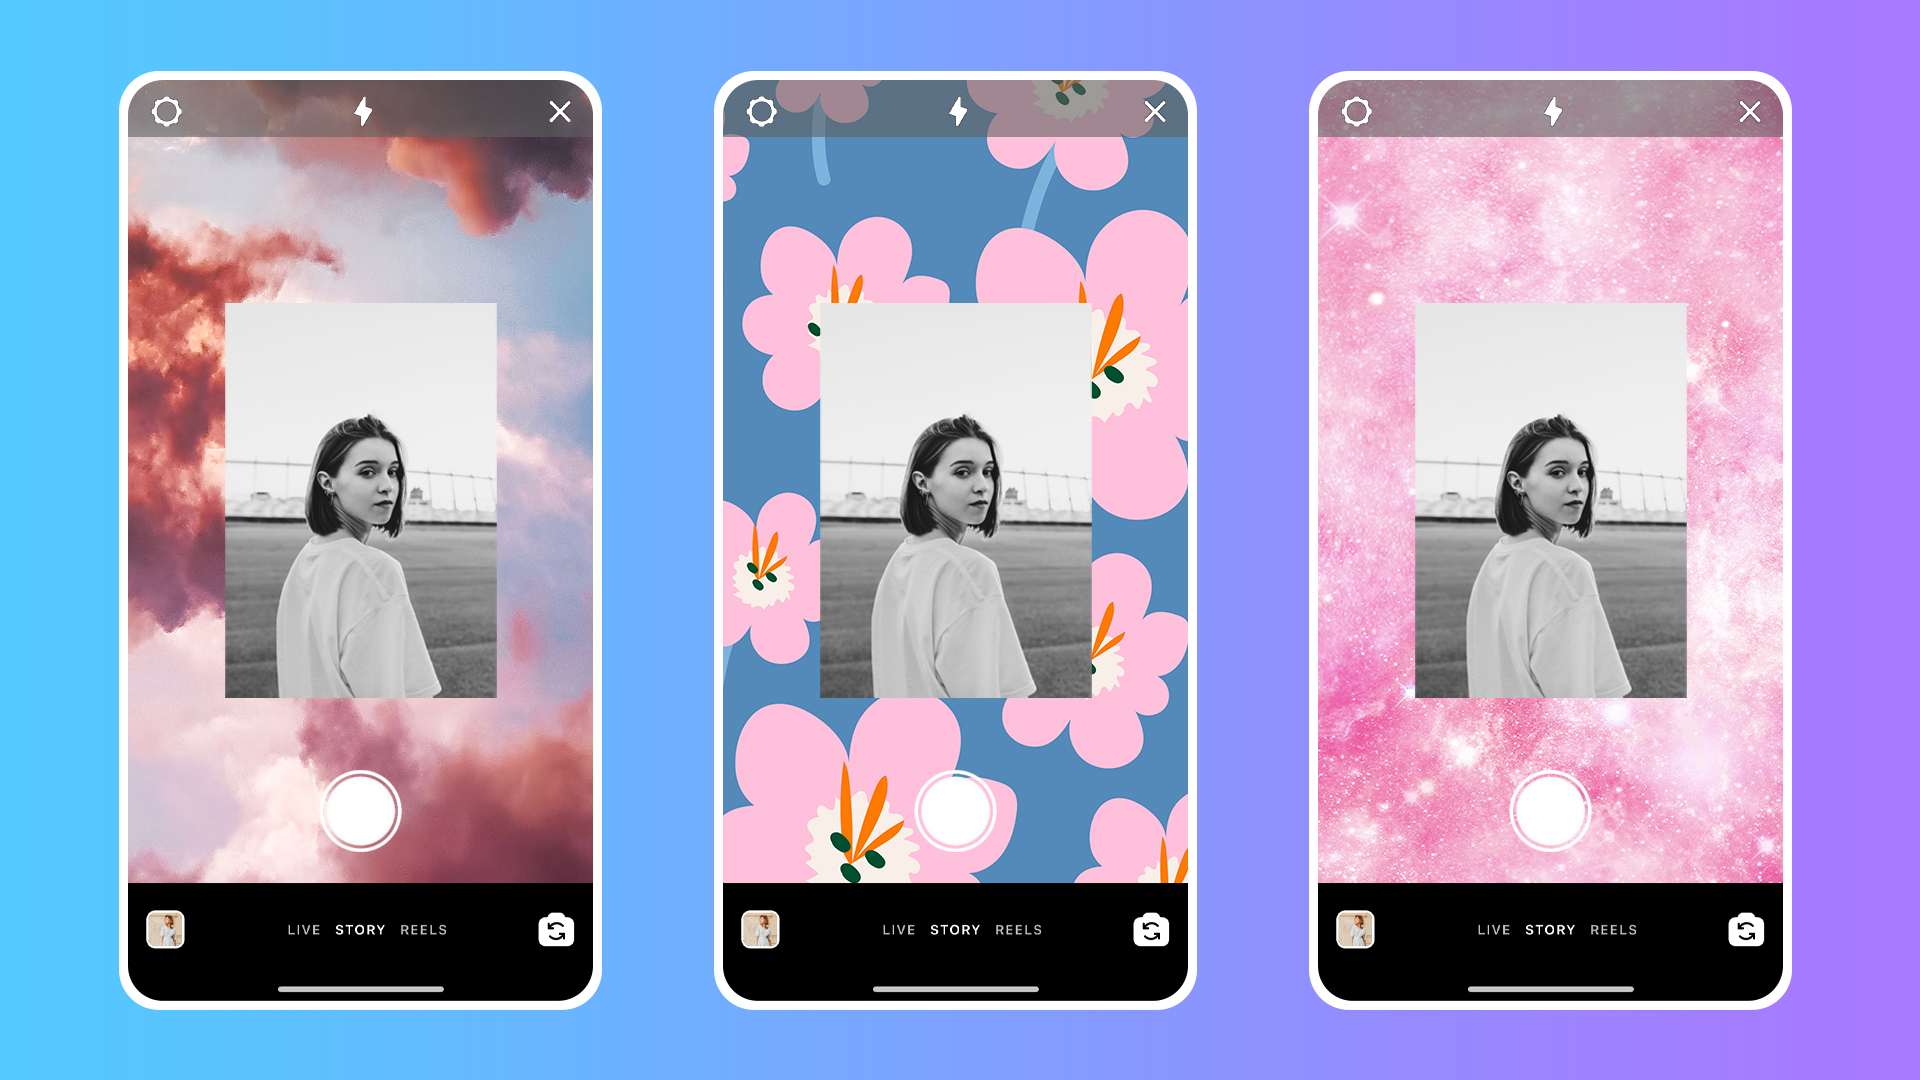 How To Change the Background Color on Your Instagram Stories - Picsart Blog